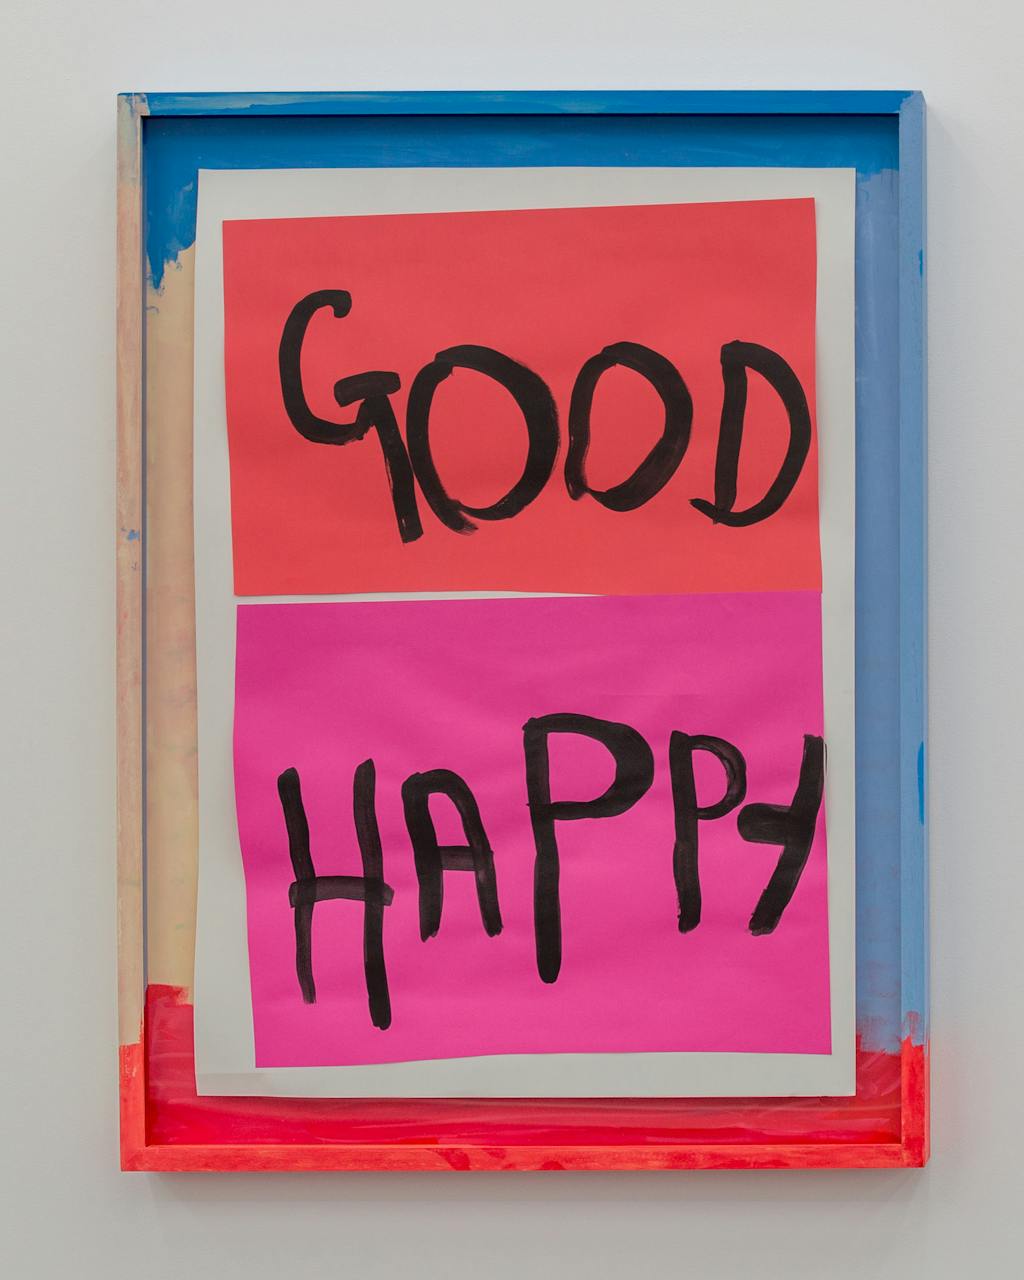 Leanne Ross
Good Happy, 2022
Ink on paper and custom artist frame
97 x 72 cm - © Image courtesy the Artist; and Kendall Koppe, Glasgow
Copyright of the Artist, Paris Internationale